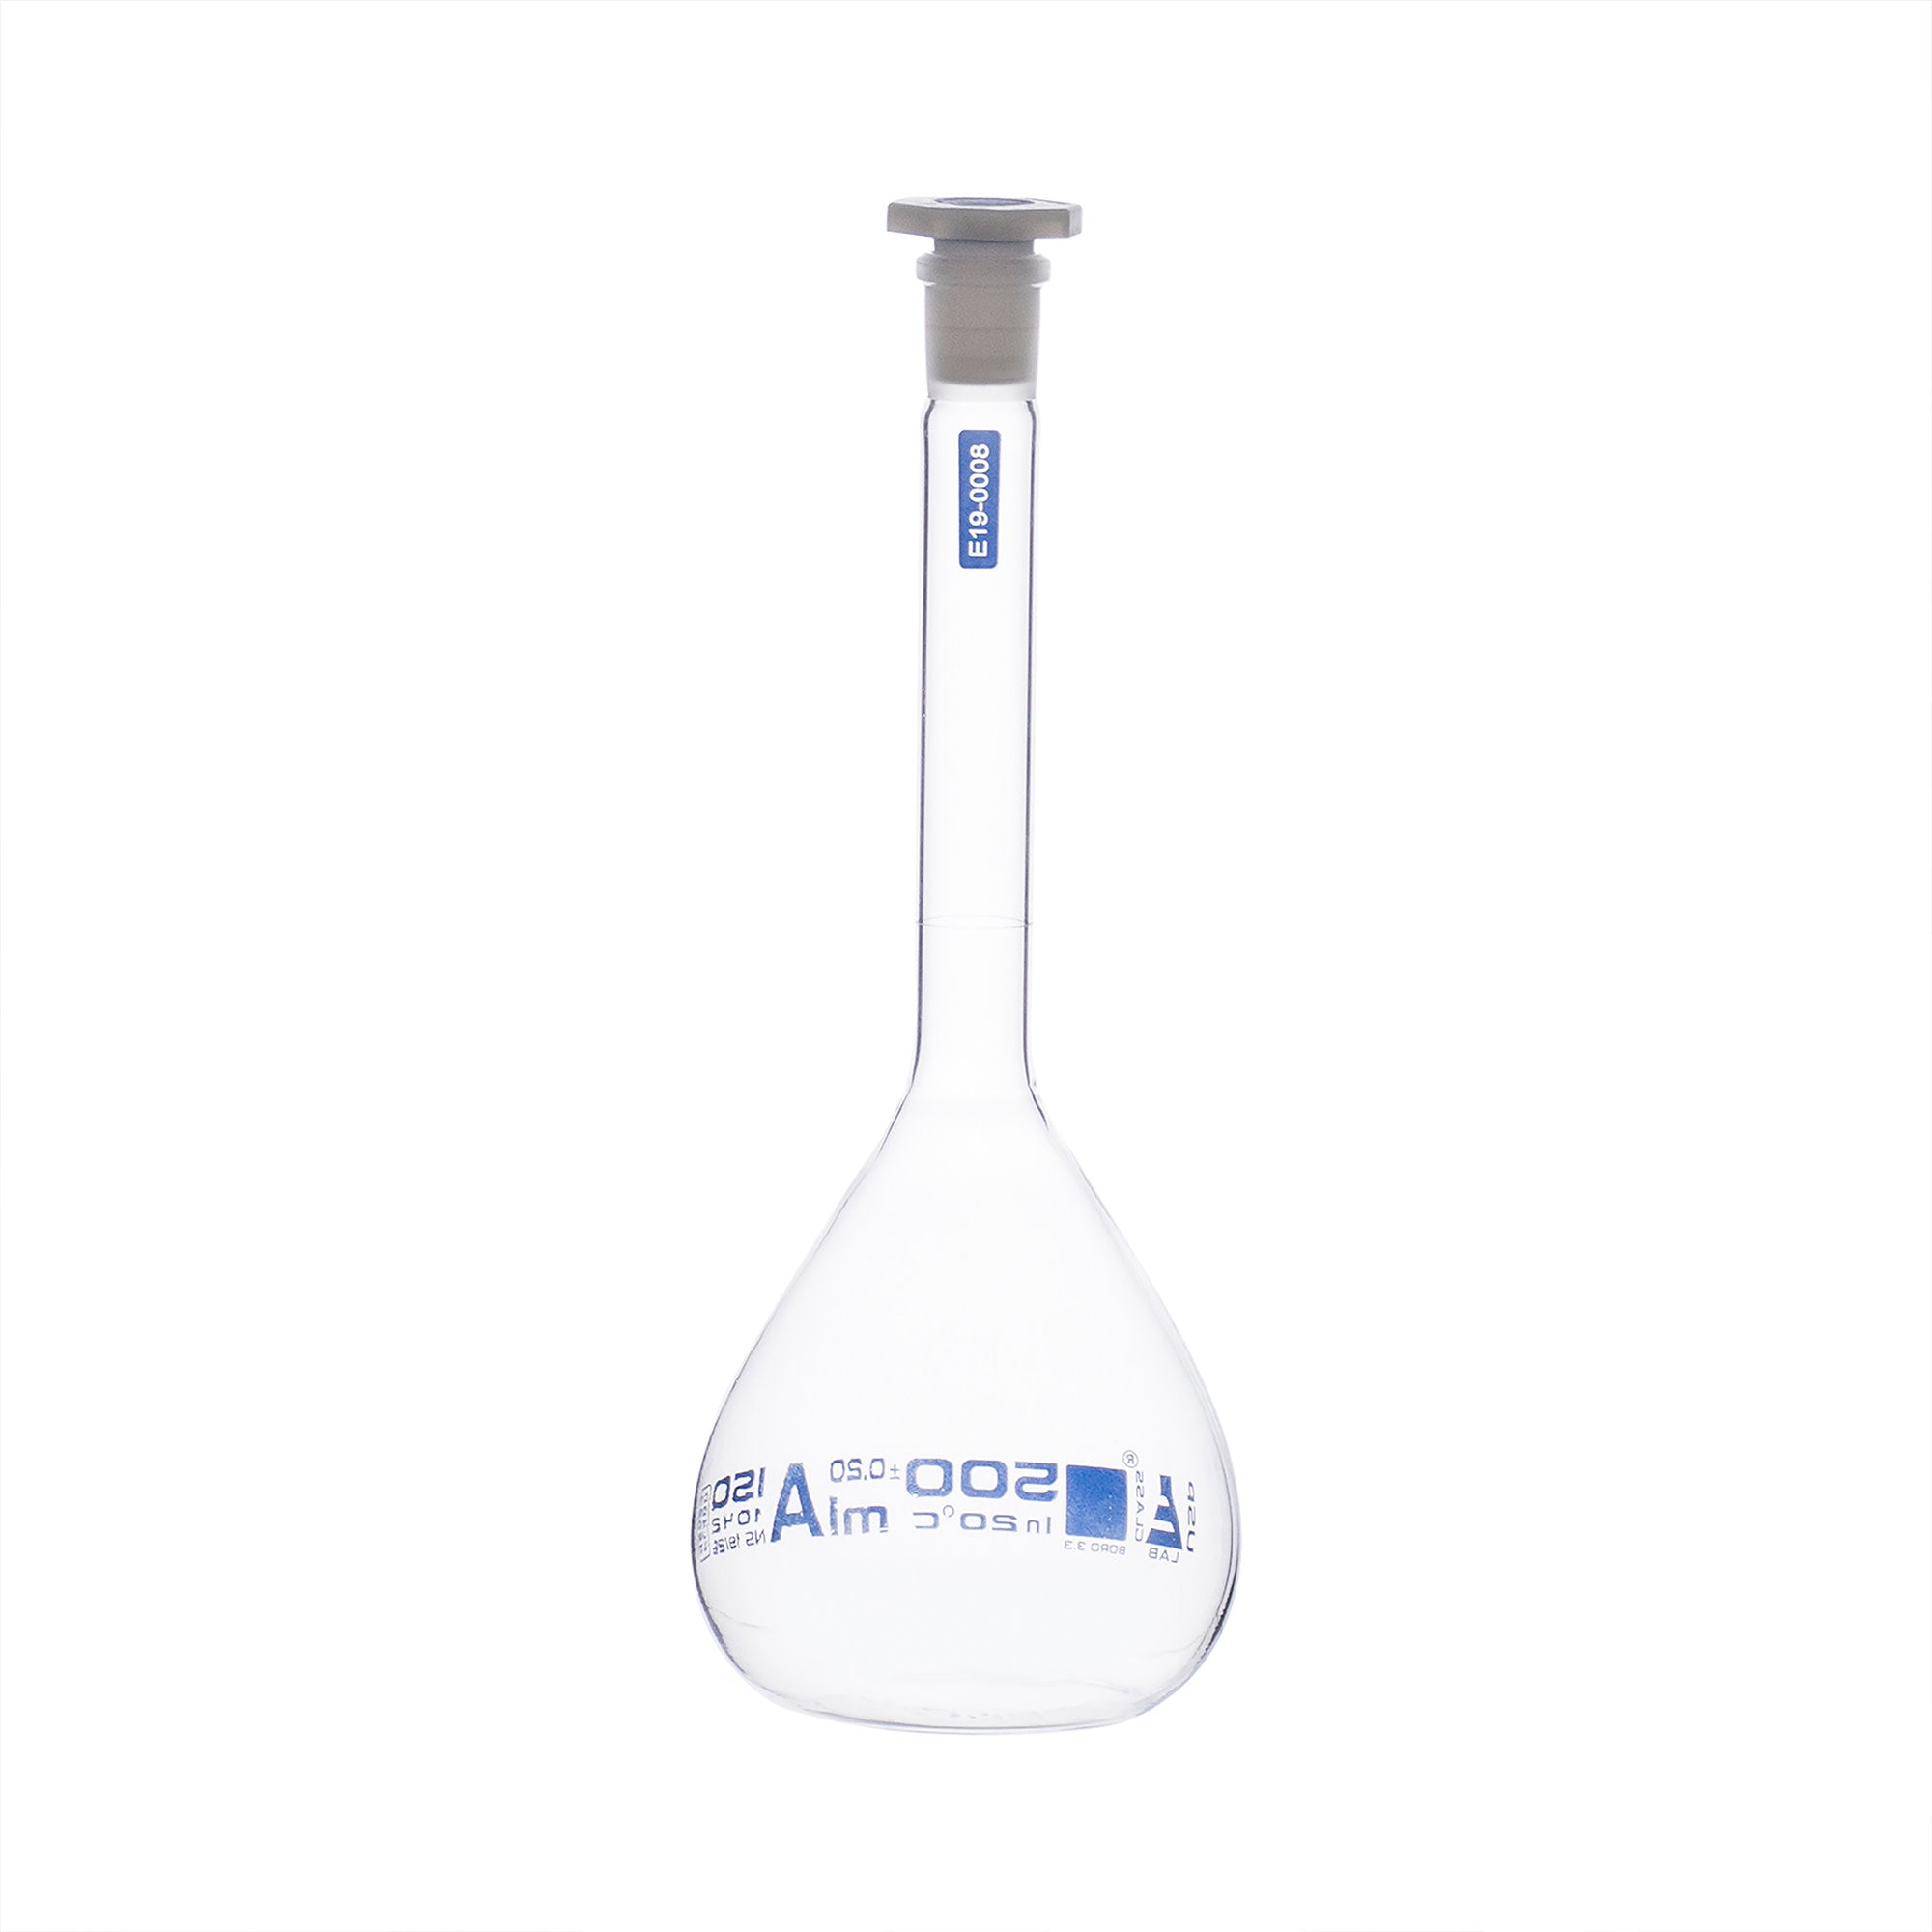 Borosilicate Glass Volumetric Flask with Solid Glass Stopper, 500 ml, USP Class A with Individual Work Certificate,  Pack of 2, Autoclavable